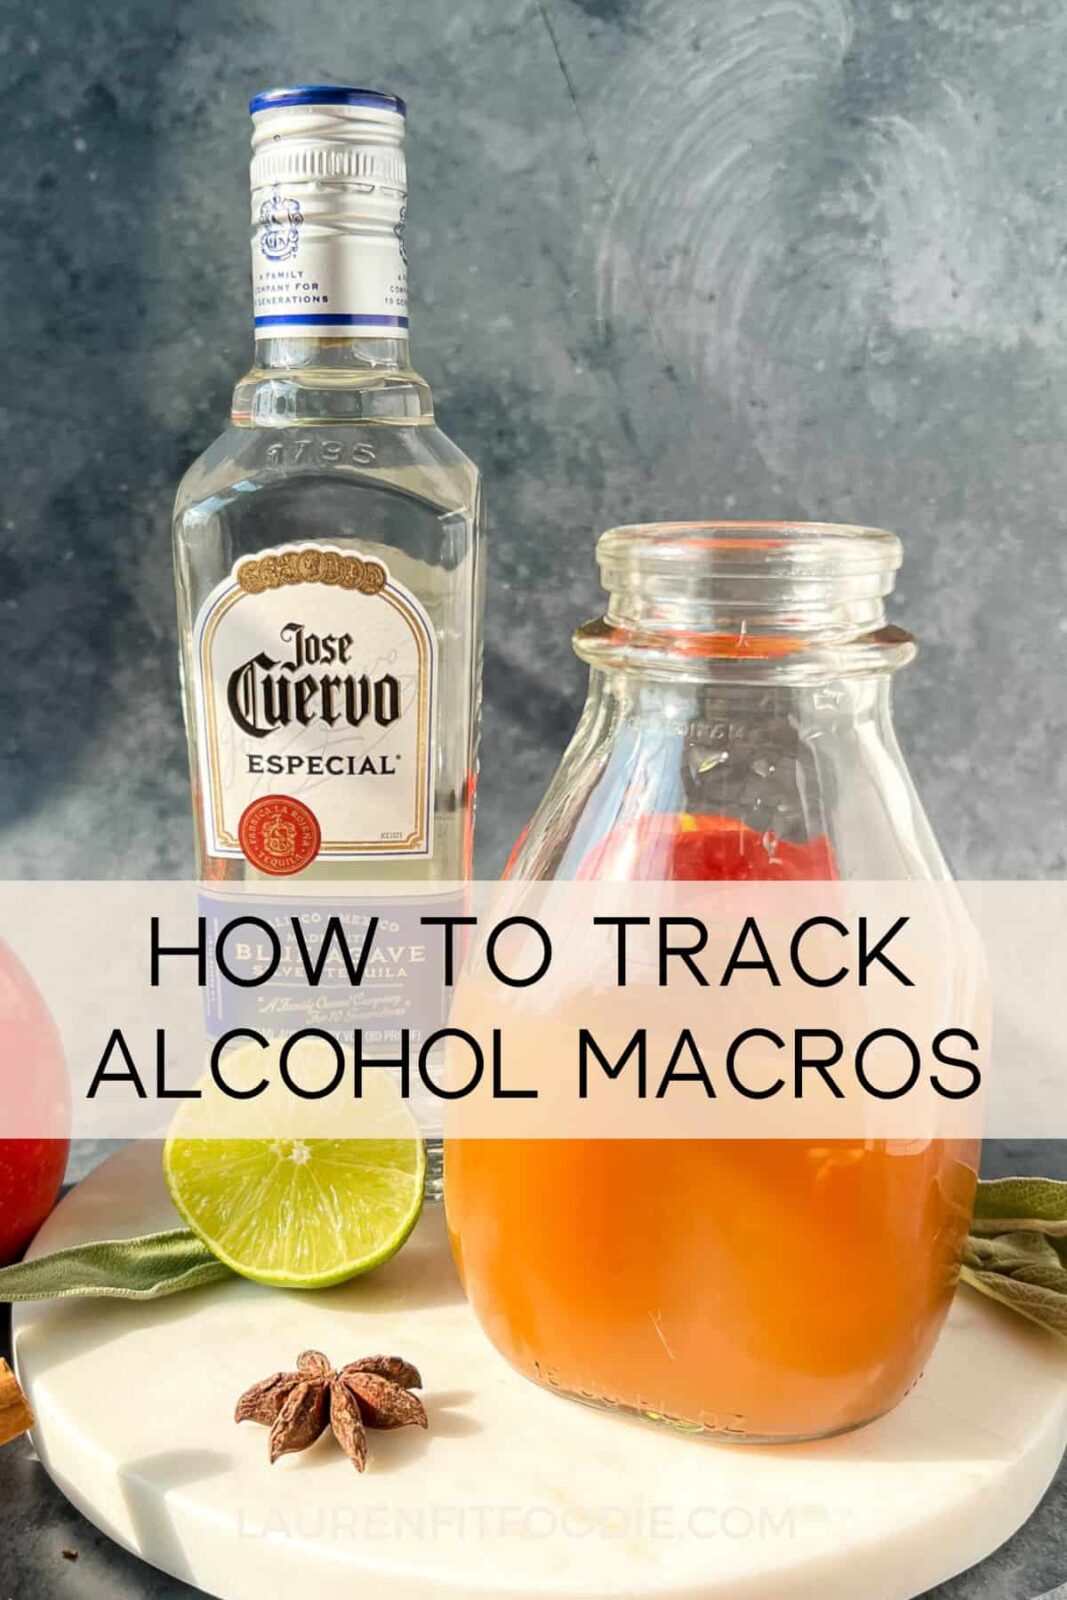 How to Track Alcohol Macros